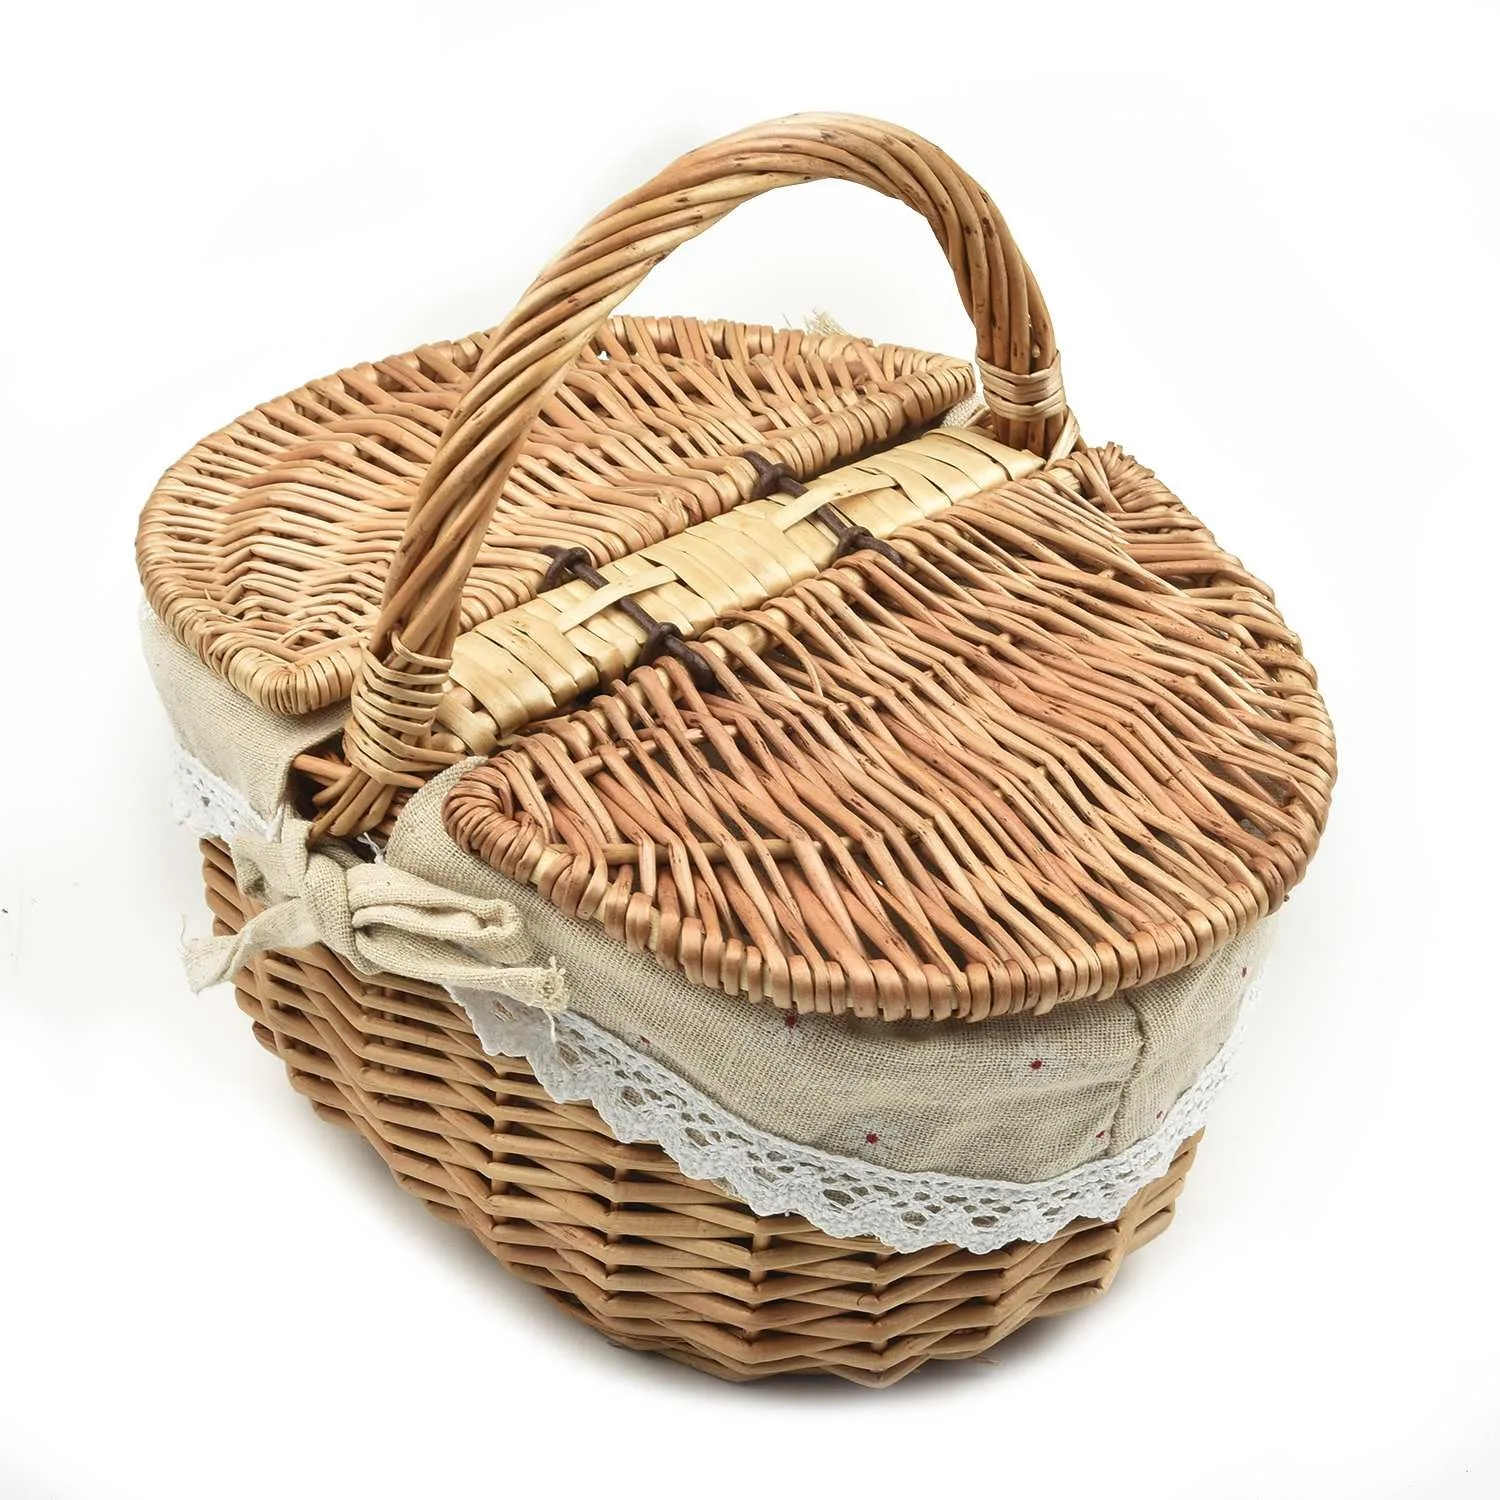 

Picnic Basket Storage Basket Household Decoration Outdoor Activity Accessories Shopping Malls The Cane 26*18*15cm